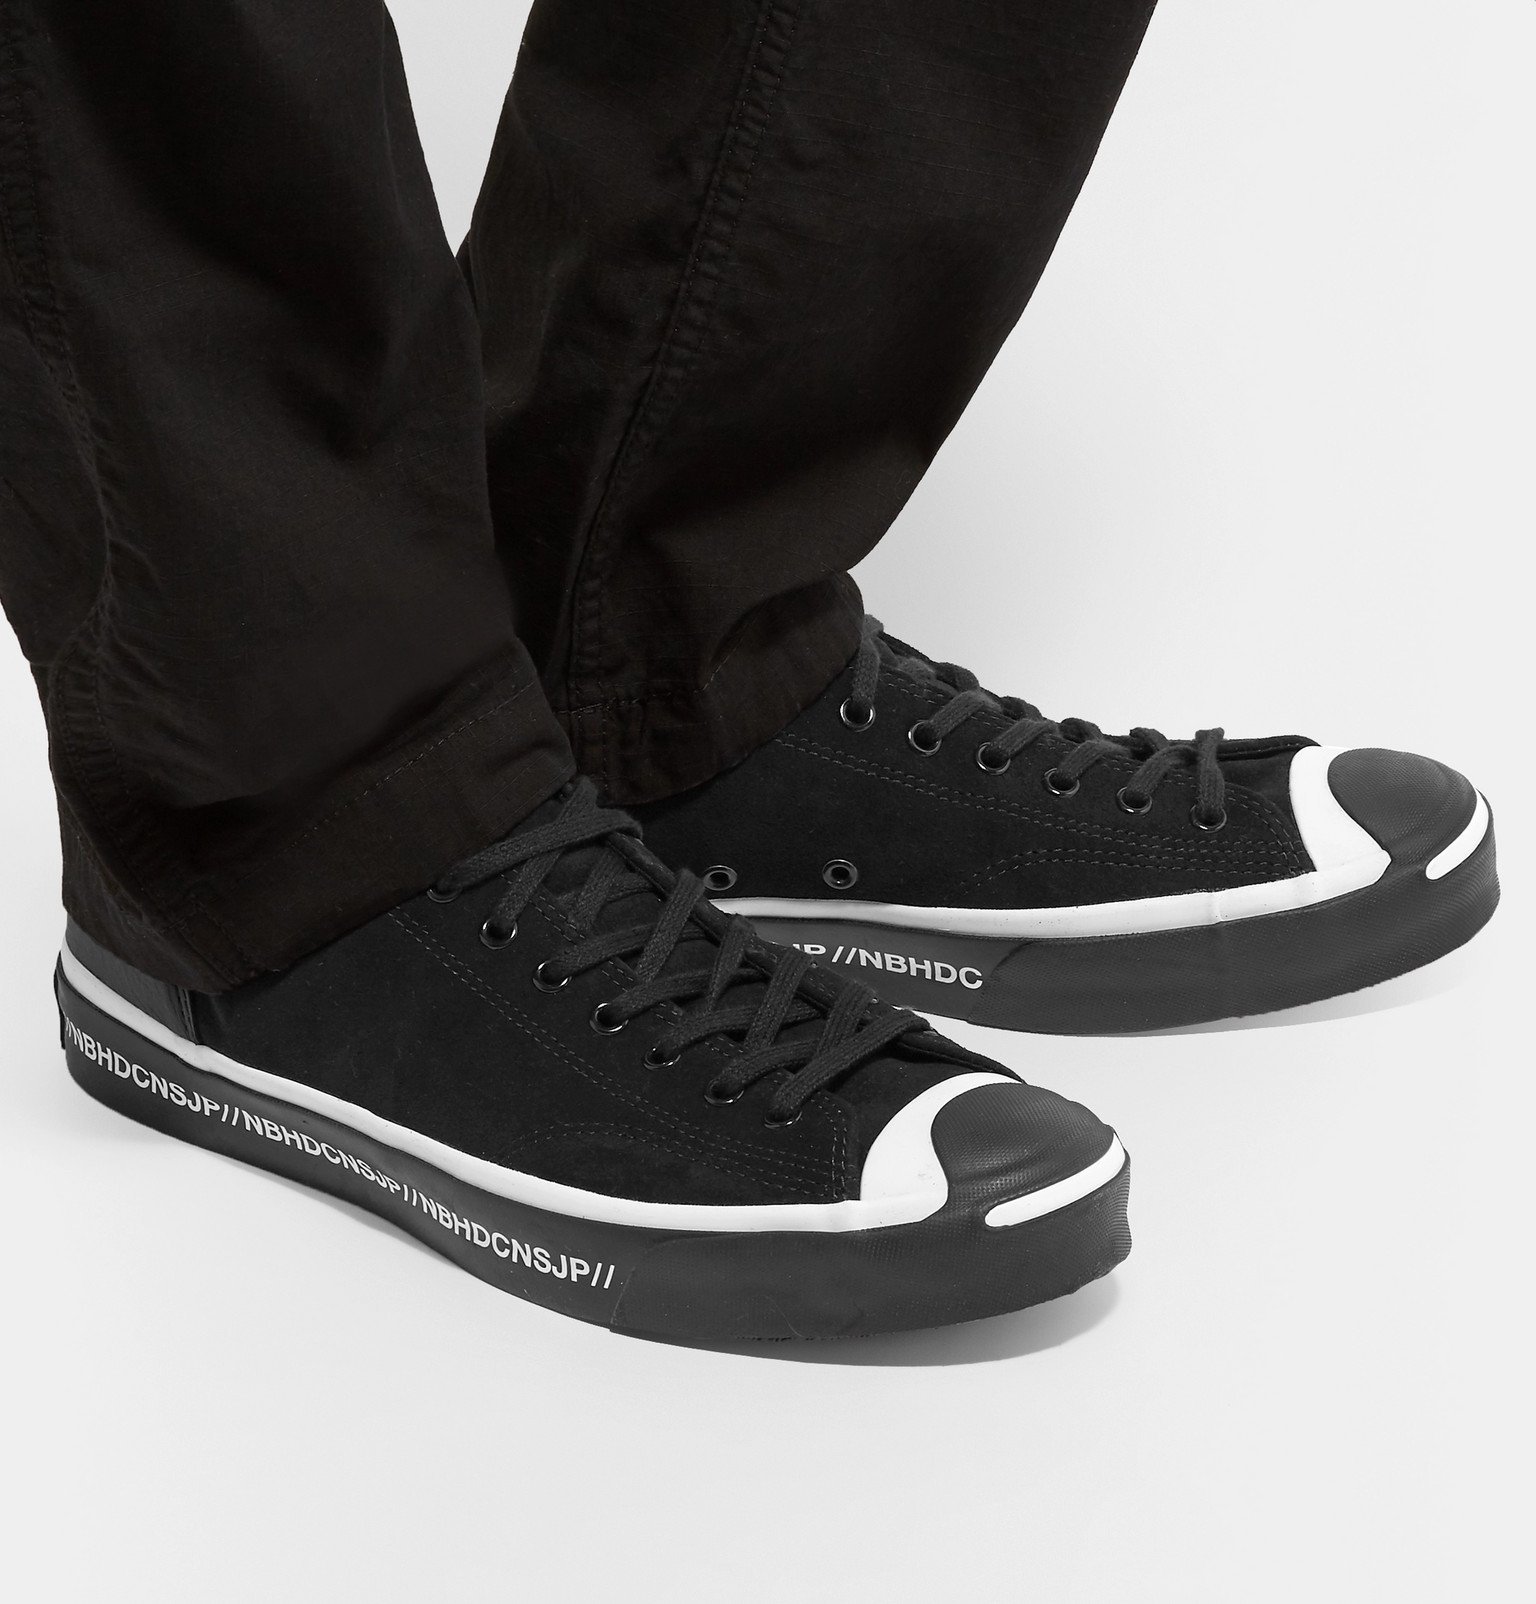 Converse - Neighborhood Jack Purcell OX Leather-Trimmed Suede Sneakers -  Black Converse